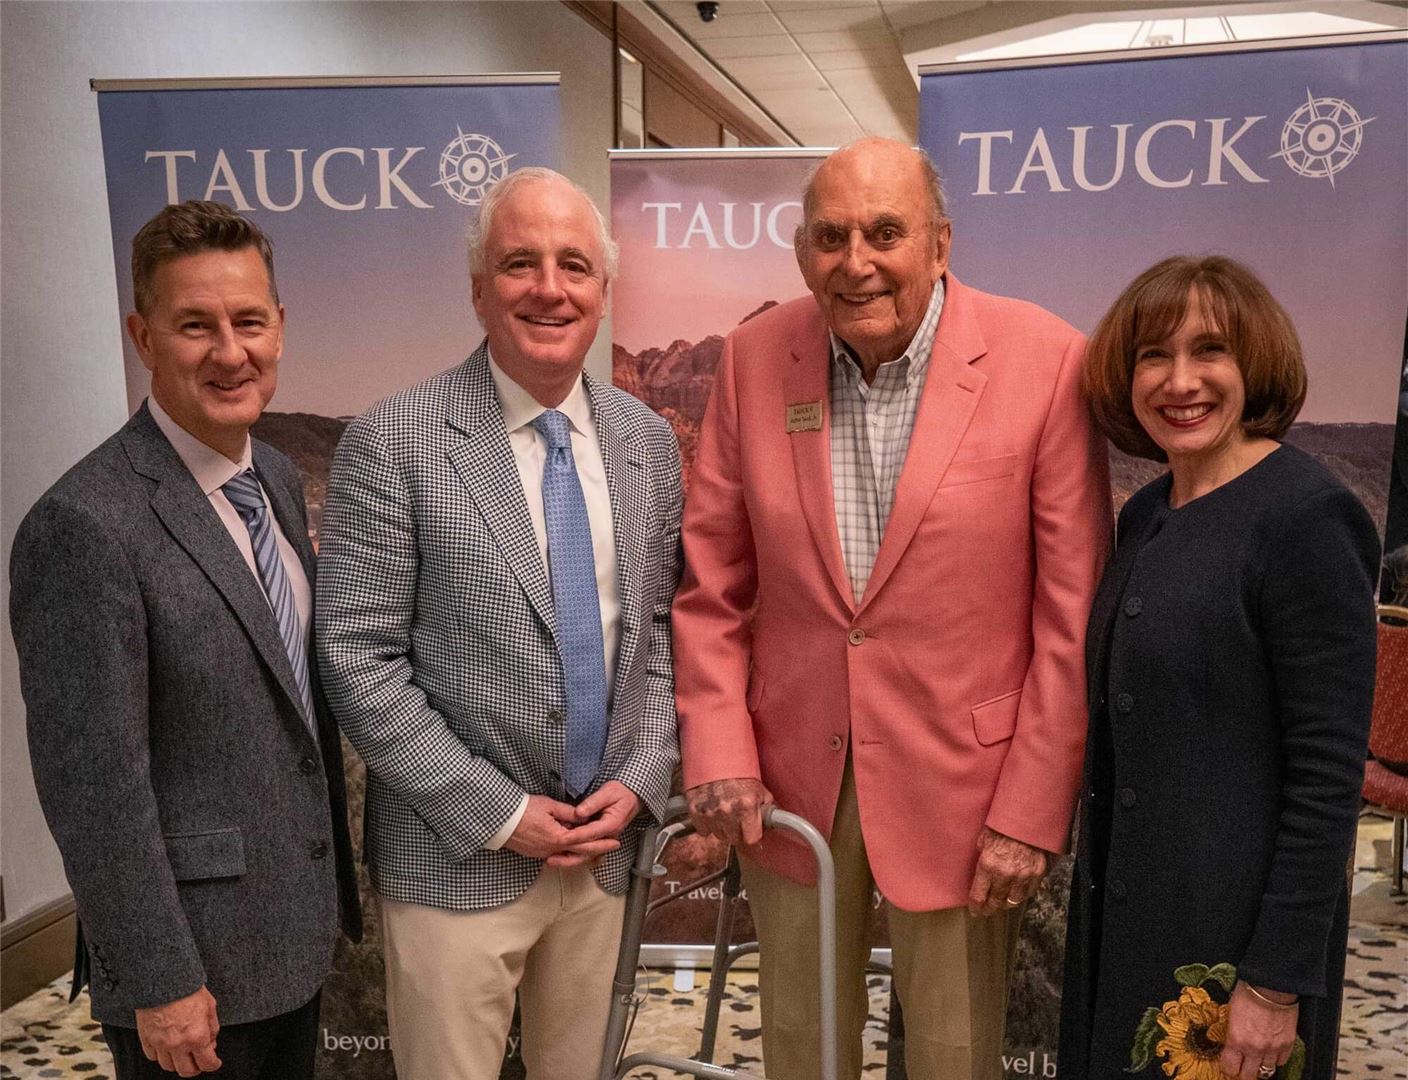 The new leadership team at Tauck 